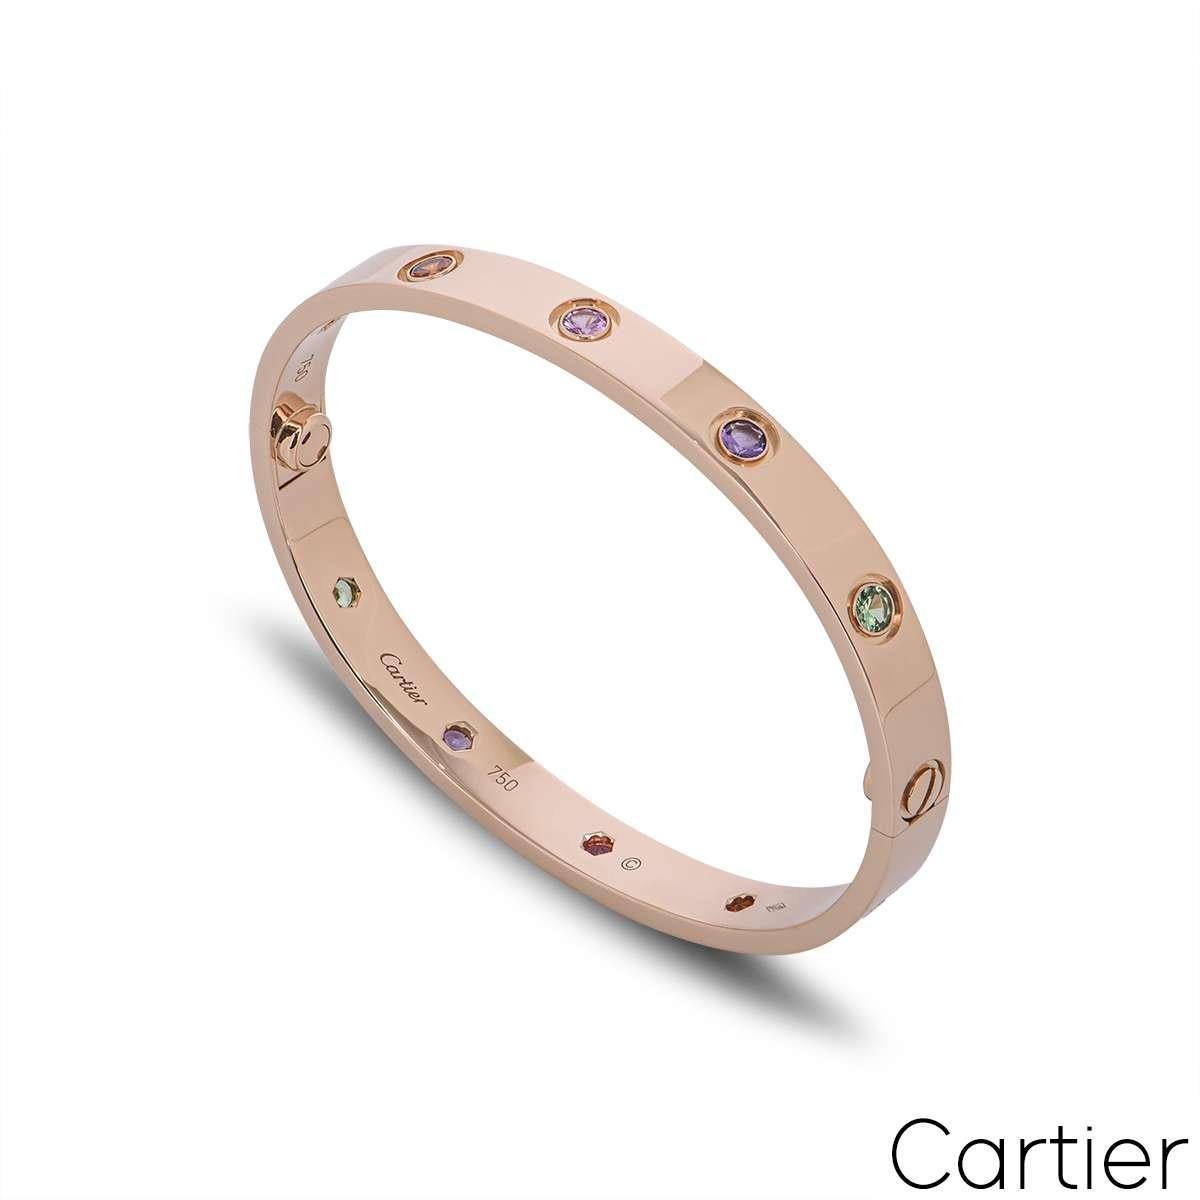 An 18k rose gold bracelet by Cartier, from their Love collection. Set with 10 coloured stones, including rose and yellow sapphires, green and orange garnets and amethysts. This bracelet features the new style screw system and is a size 19 with a